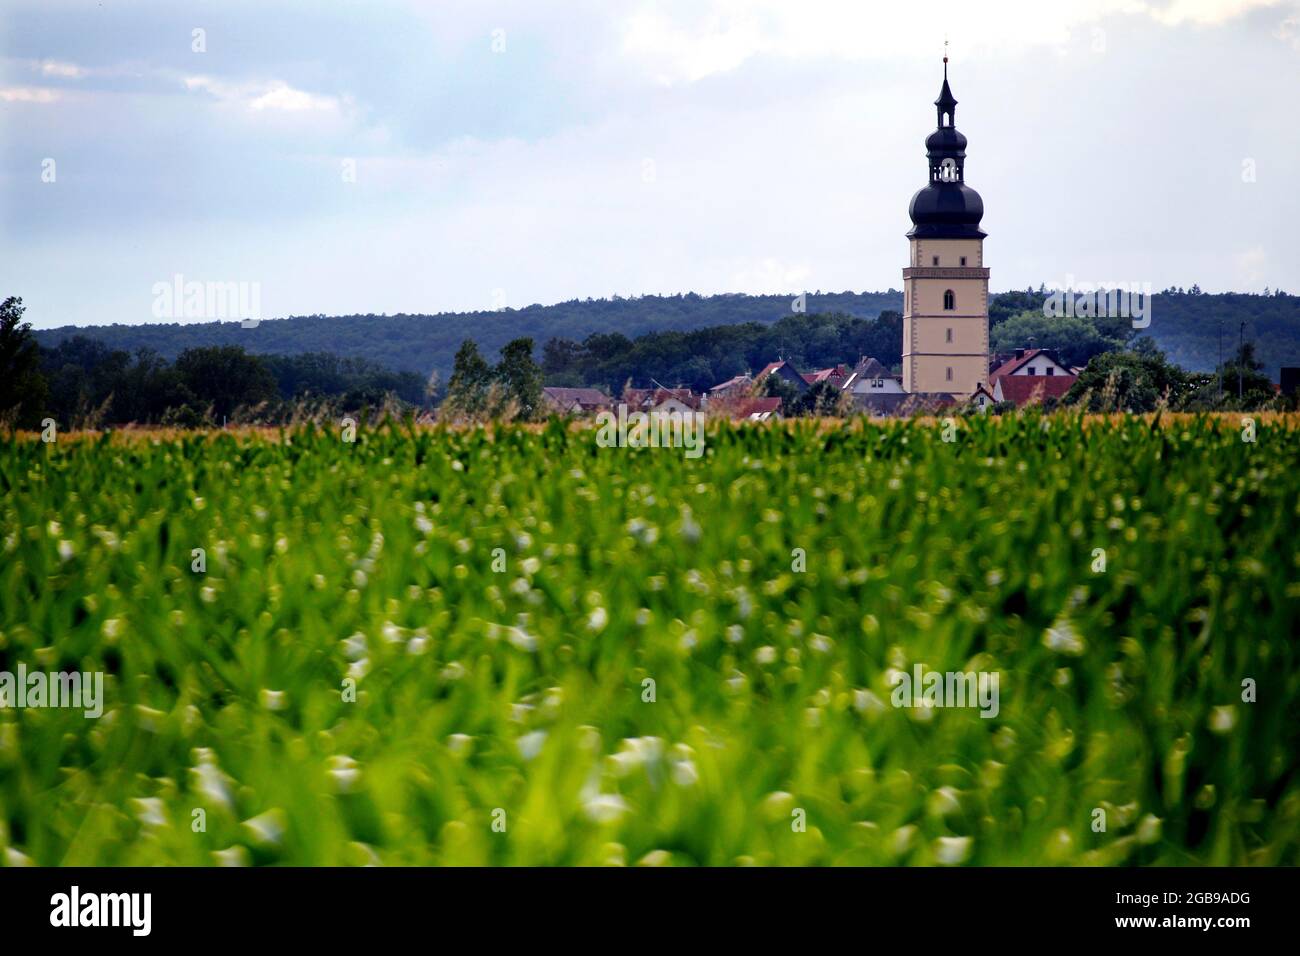 Field and church spire, church spire with onion roof, Green Belt, border path, Behrungen, Grabfeld municipality, Thuringian Forest, Thuringia, Germany Stock Photo